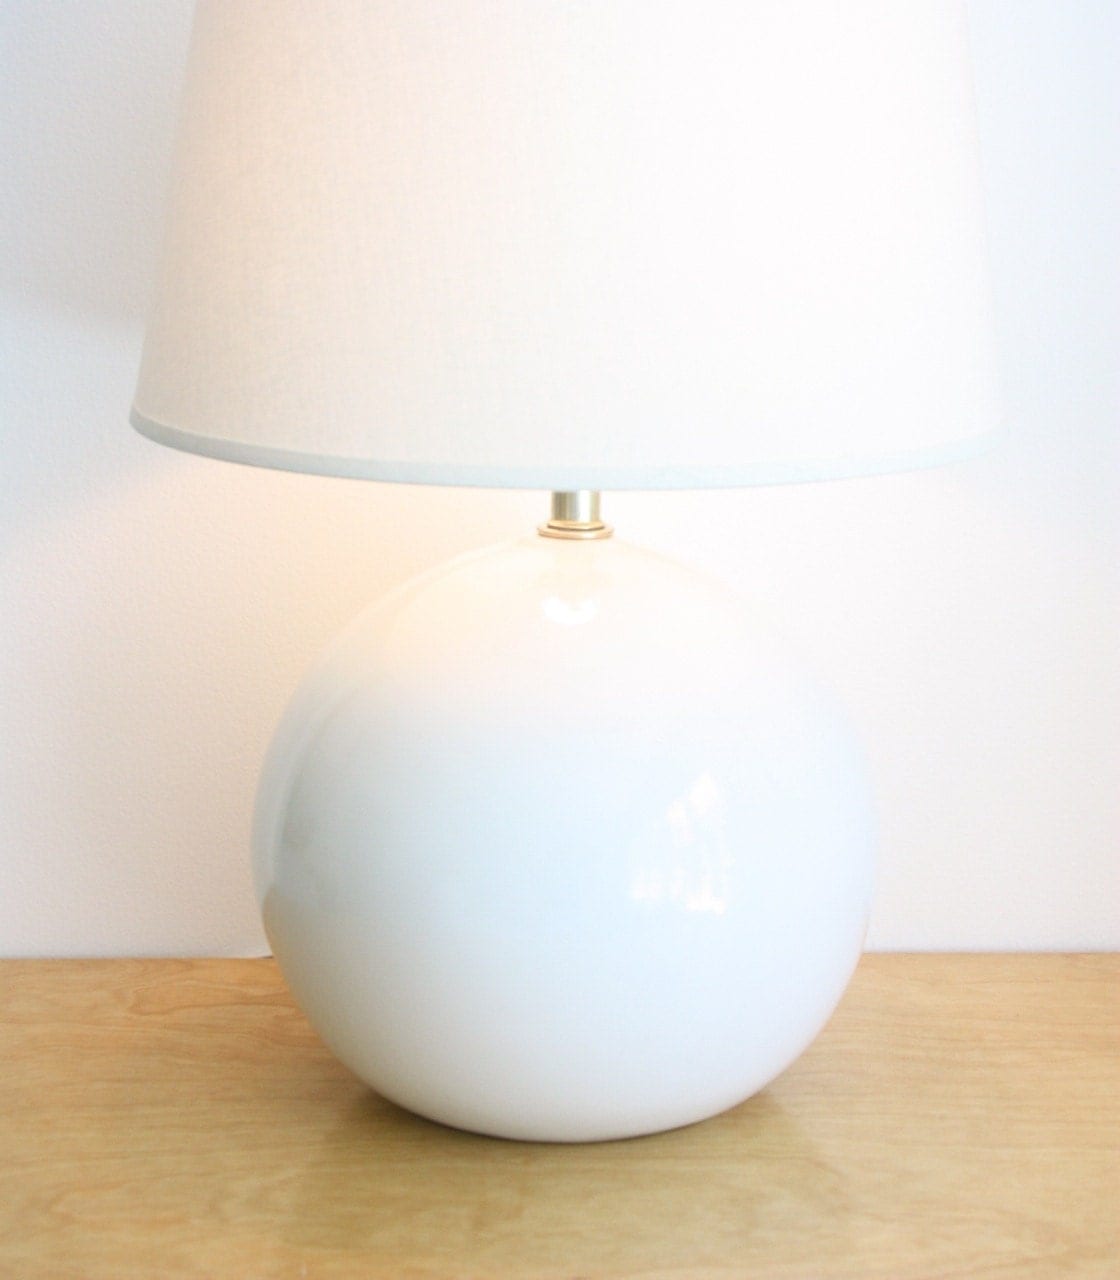 Ceramic Table Lamps on Vintage White Ceramic Ball Table Lamp By Estateeclectic On Etsy